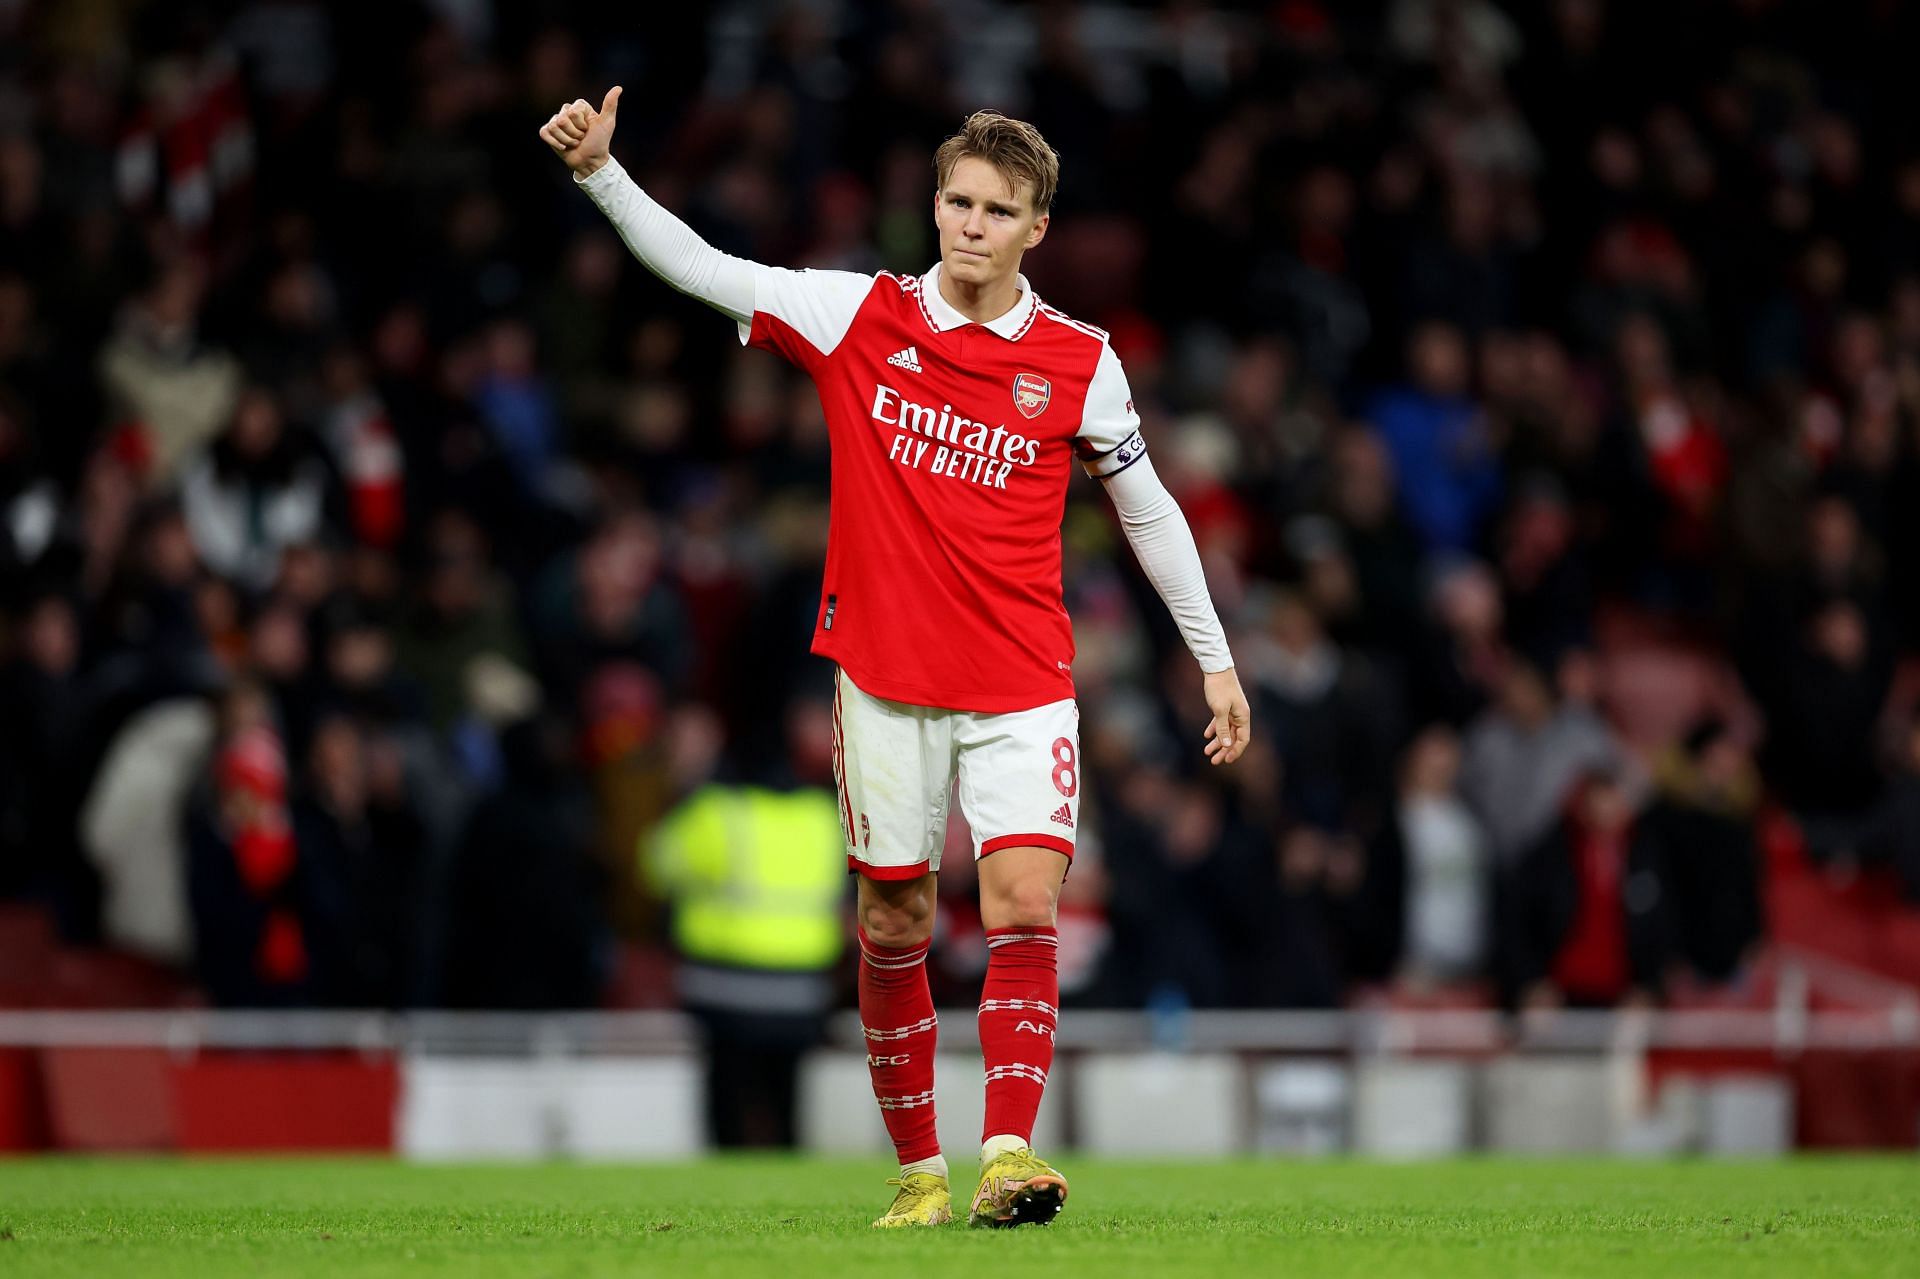 Martin Odegaard has gone from strength to strength at the Emirates.